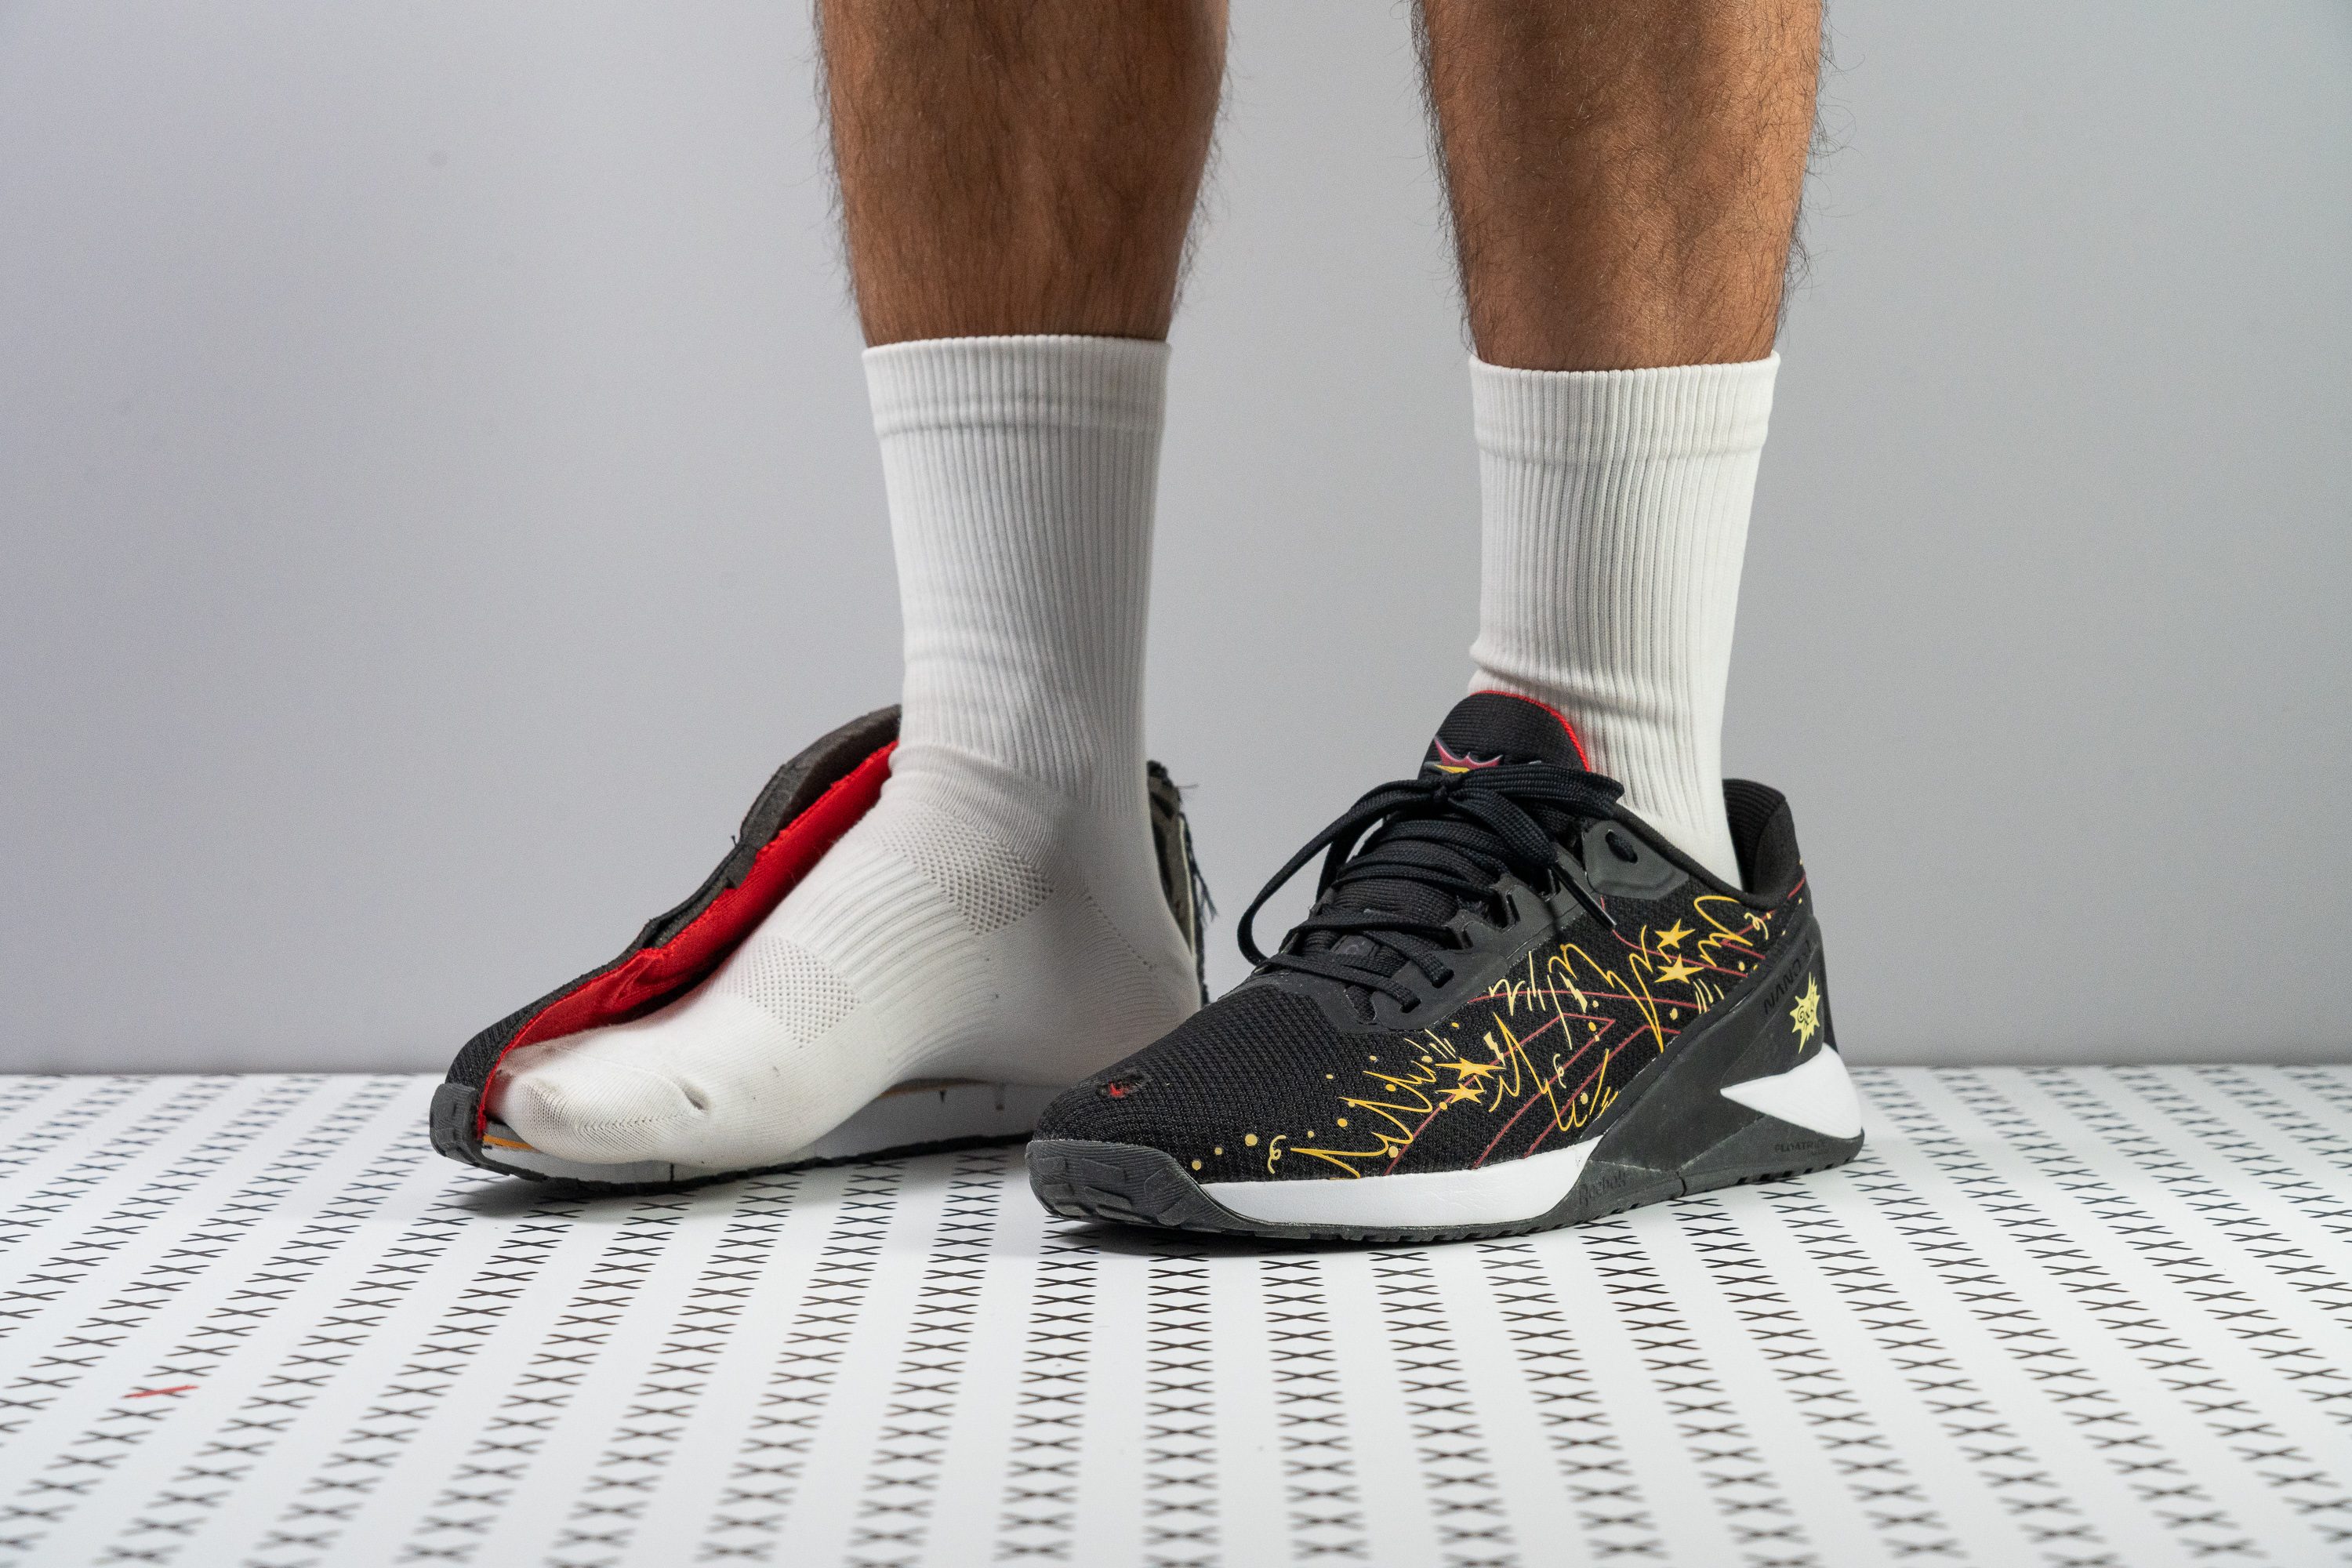 Reebok Nano X1 Isn't Just for Crossfit: Release Info, Images & More